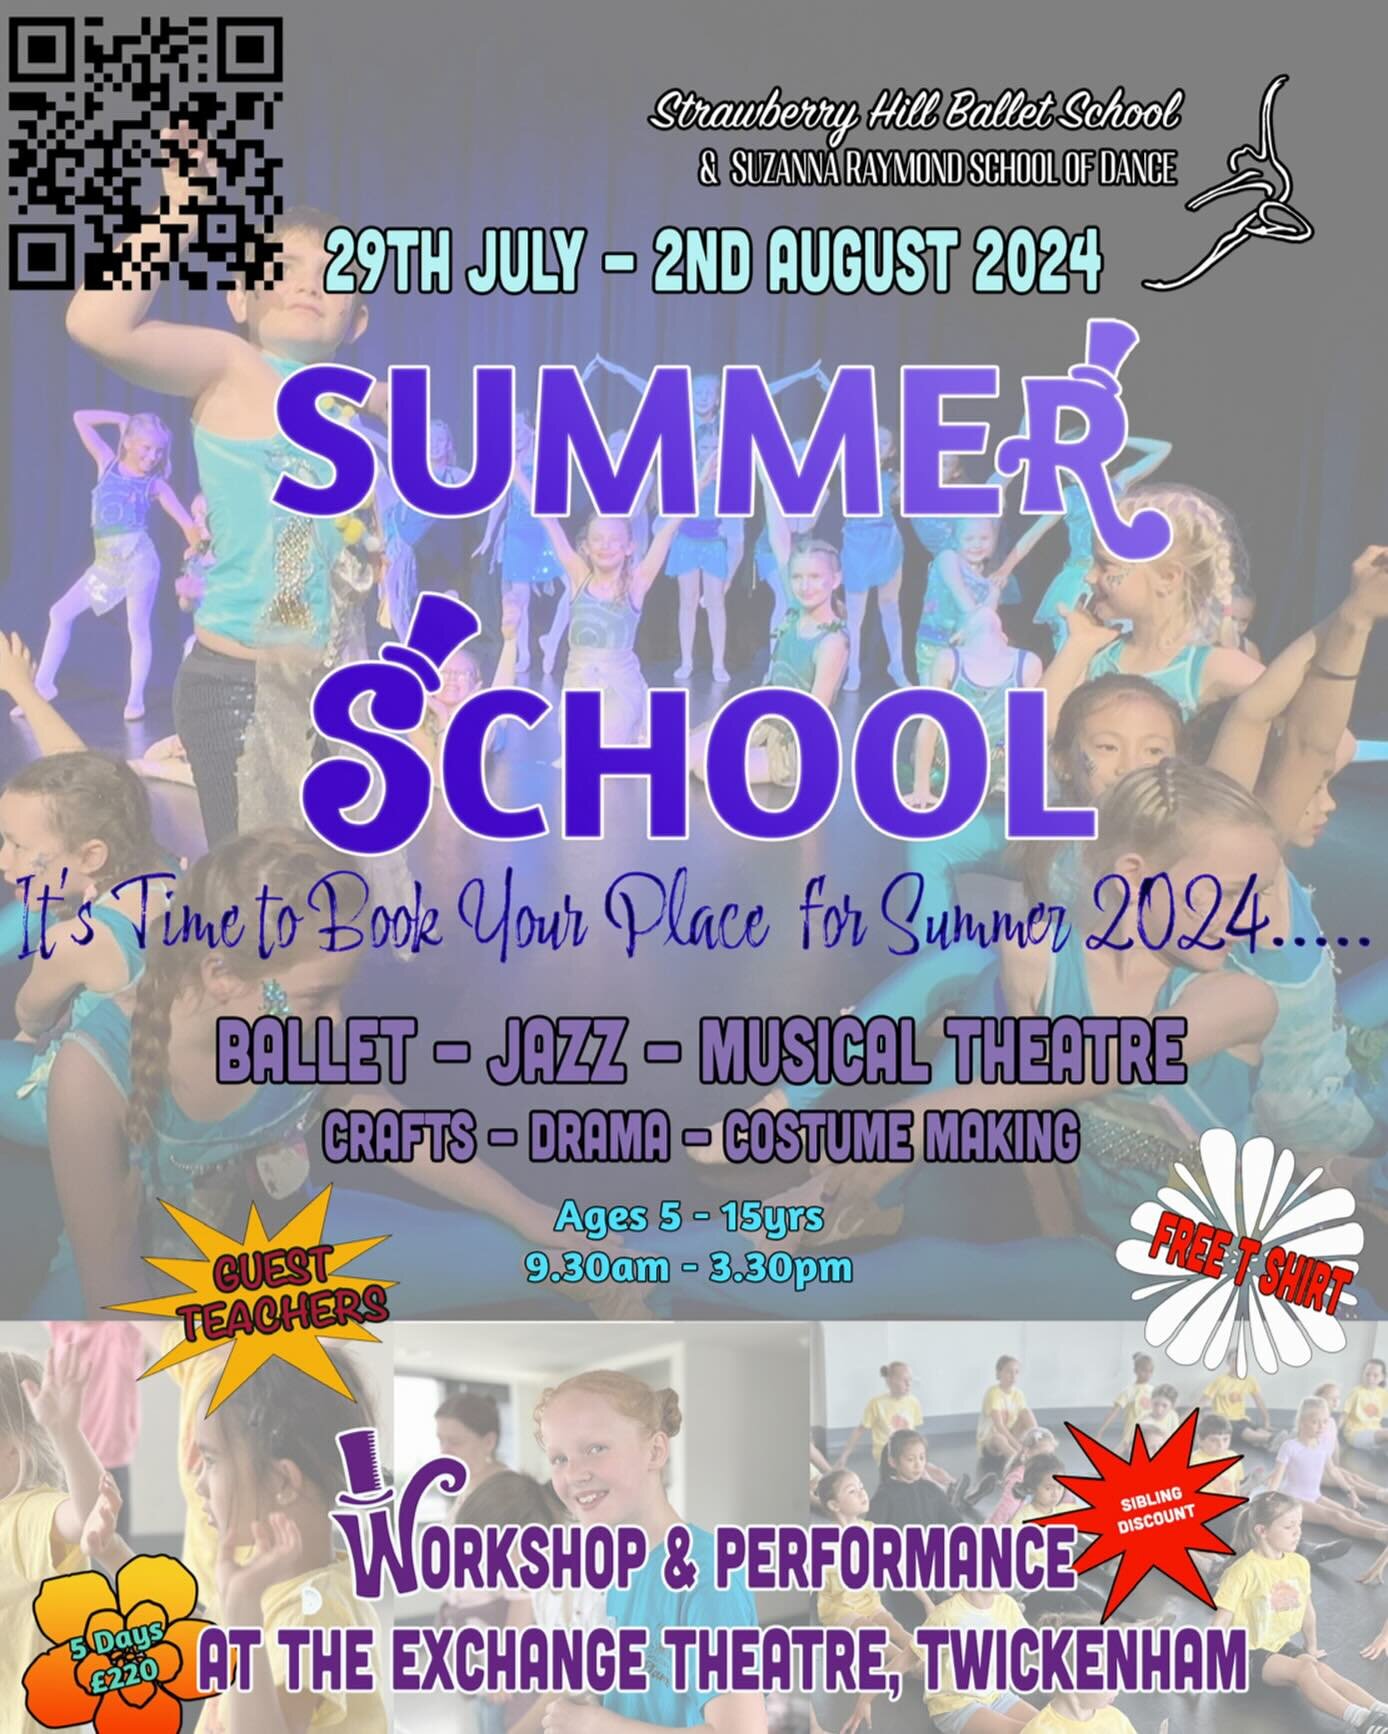 After last years great success
Strawberry Hill Ballet School
has teamed up again with Suzanna Raymond School of Dance
FOR A TRULY SCRUMPTIOUS SUMMER SCHOOL!
its going to be great fun and fabulous week for students from aged 5 to 15 years...

#summer2